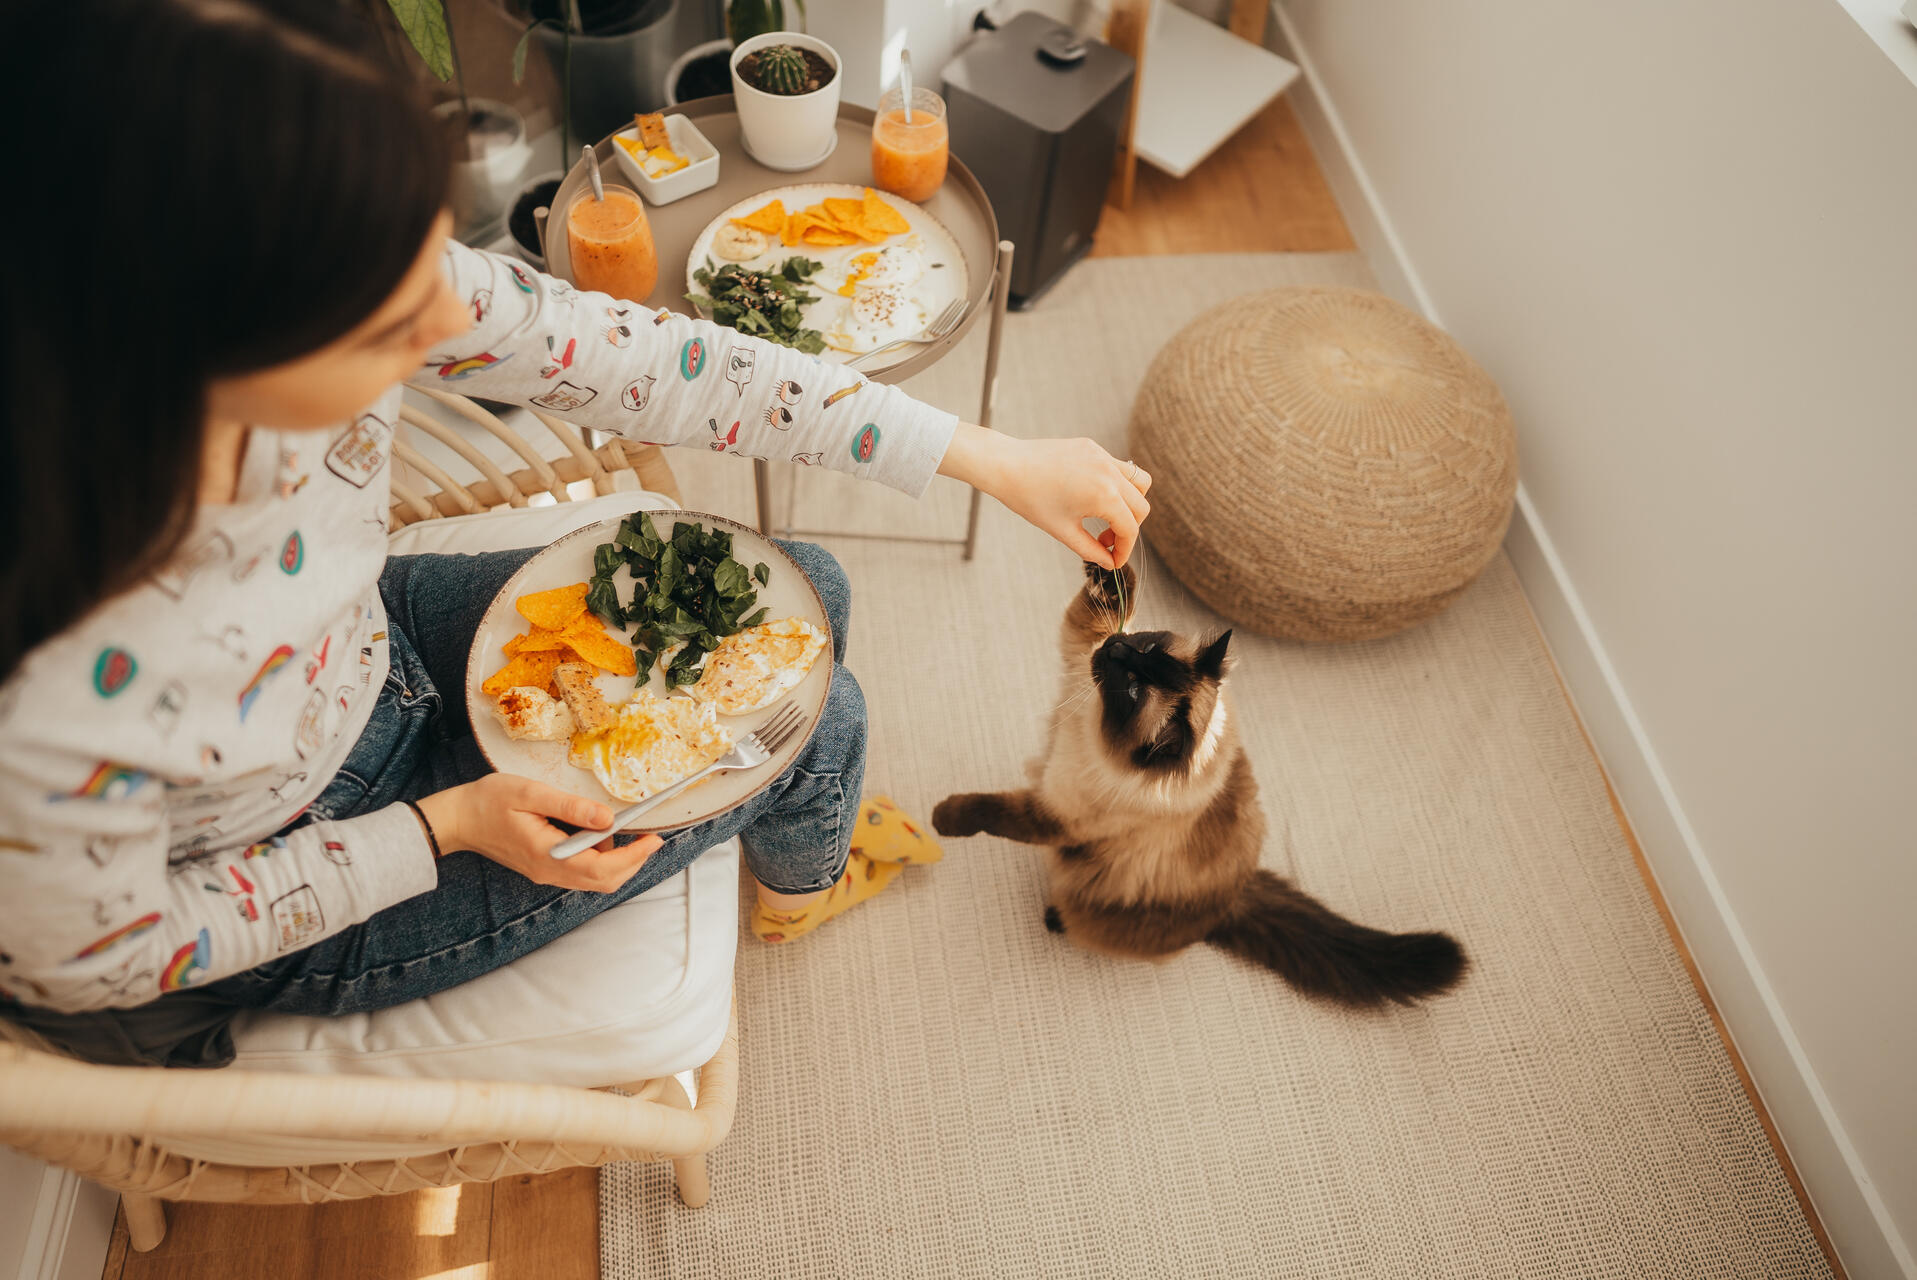 A woman feeding her cat a snack